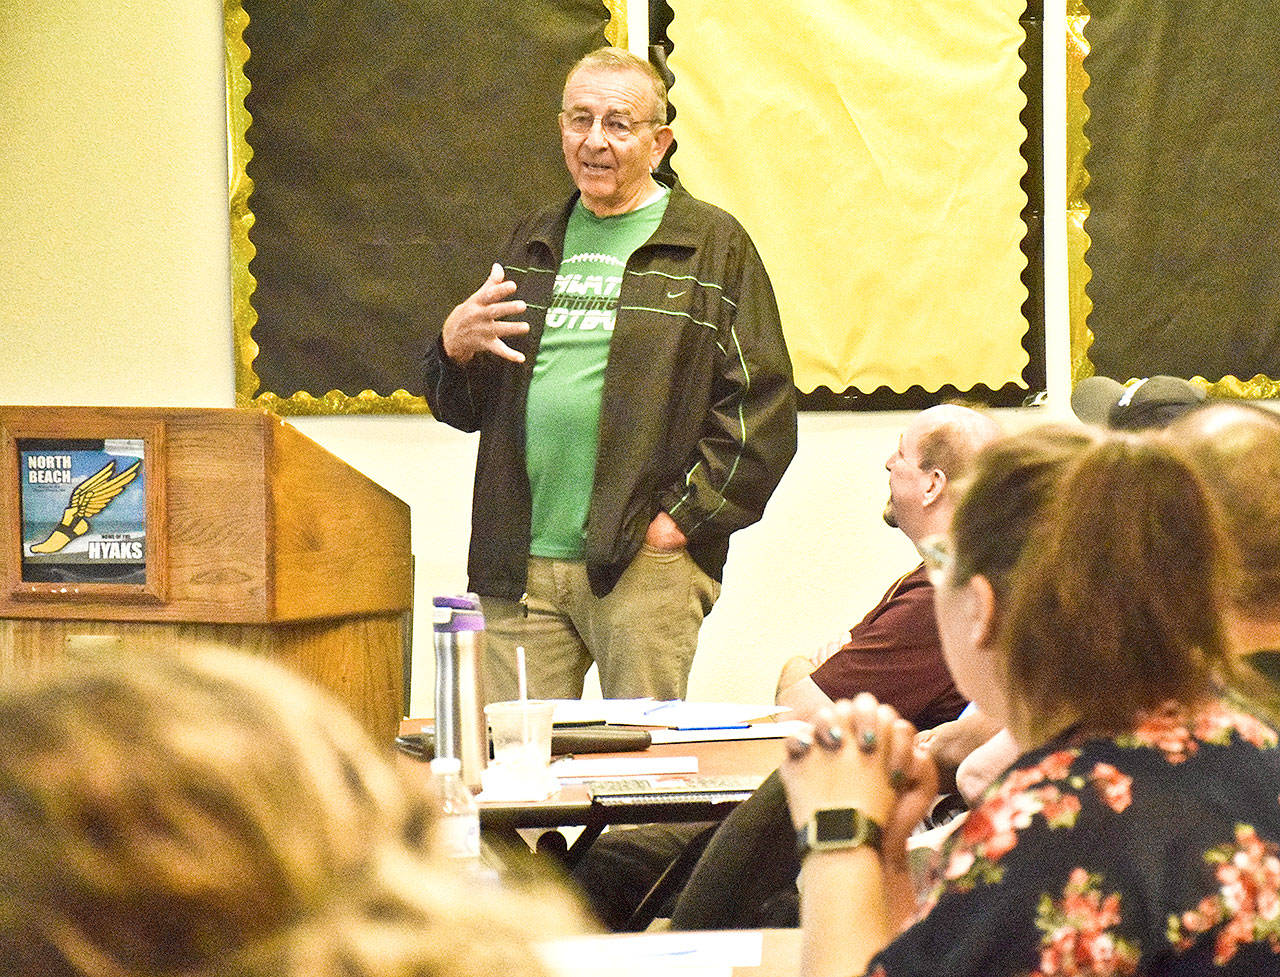 Sid Otton, left, the winningest football coach at any level in Washington State history, spoke to about 40 coaches, assistants and others at the North Beach Coaches Summit, held Friday at North Beach Junior/Senior High School.